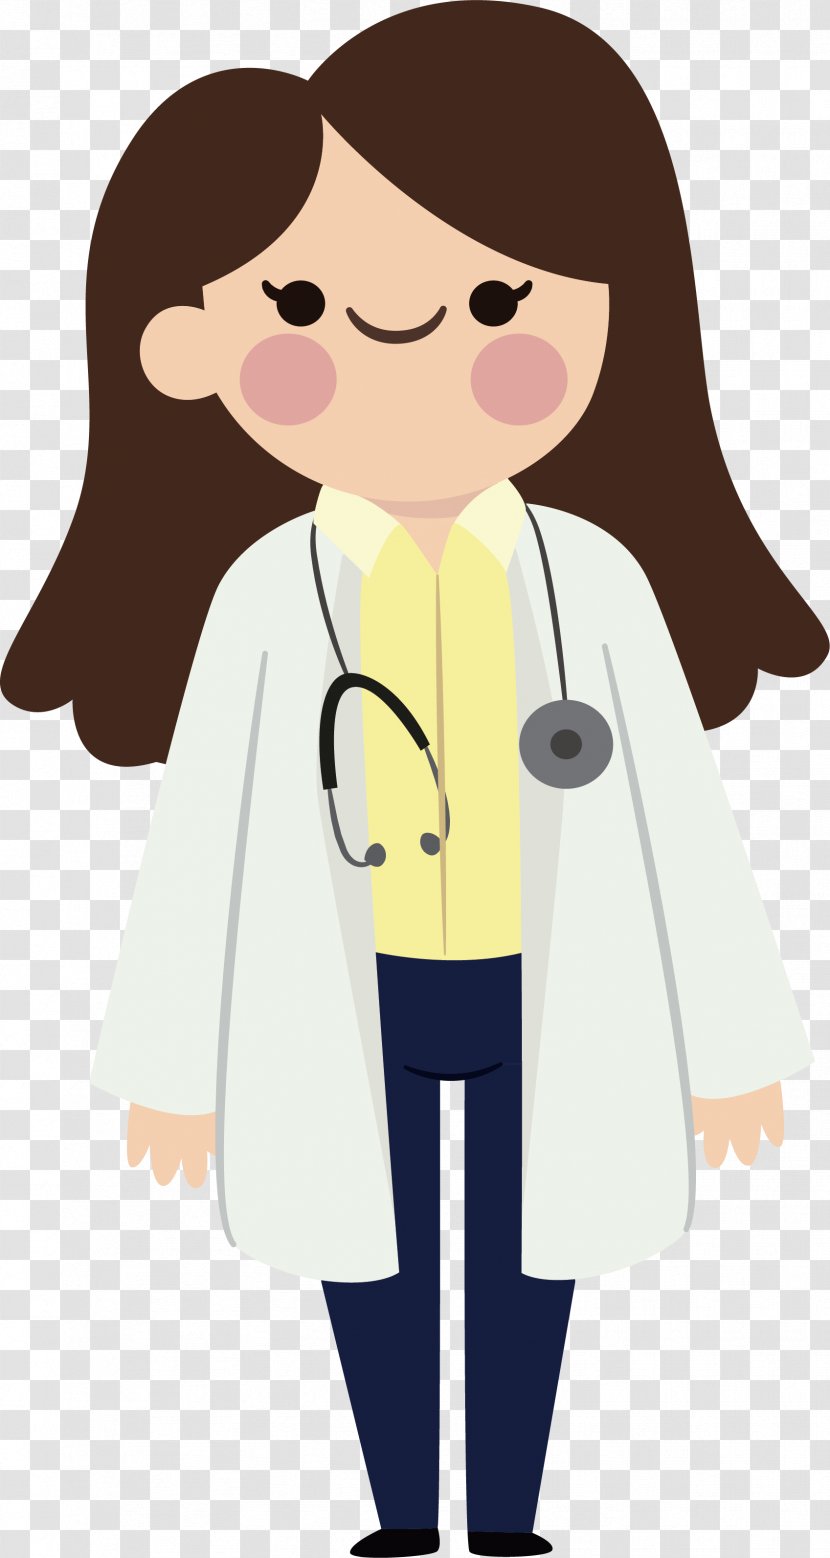 Physician Clip Art - Silhouette - Cute Long Haired Doctor Transparent PNG